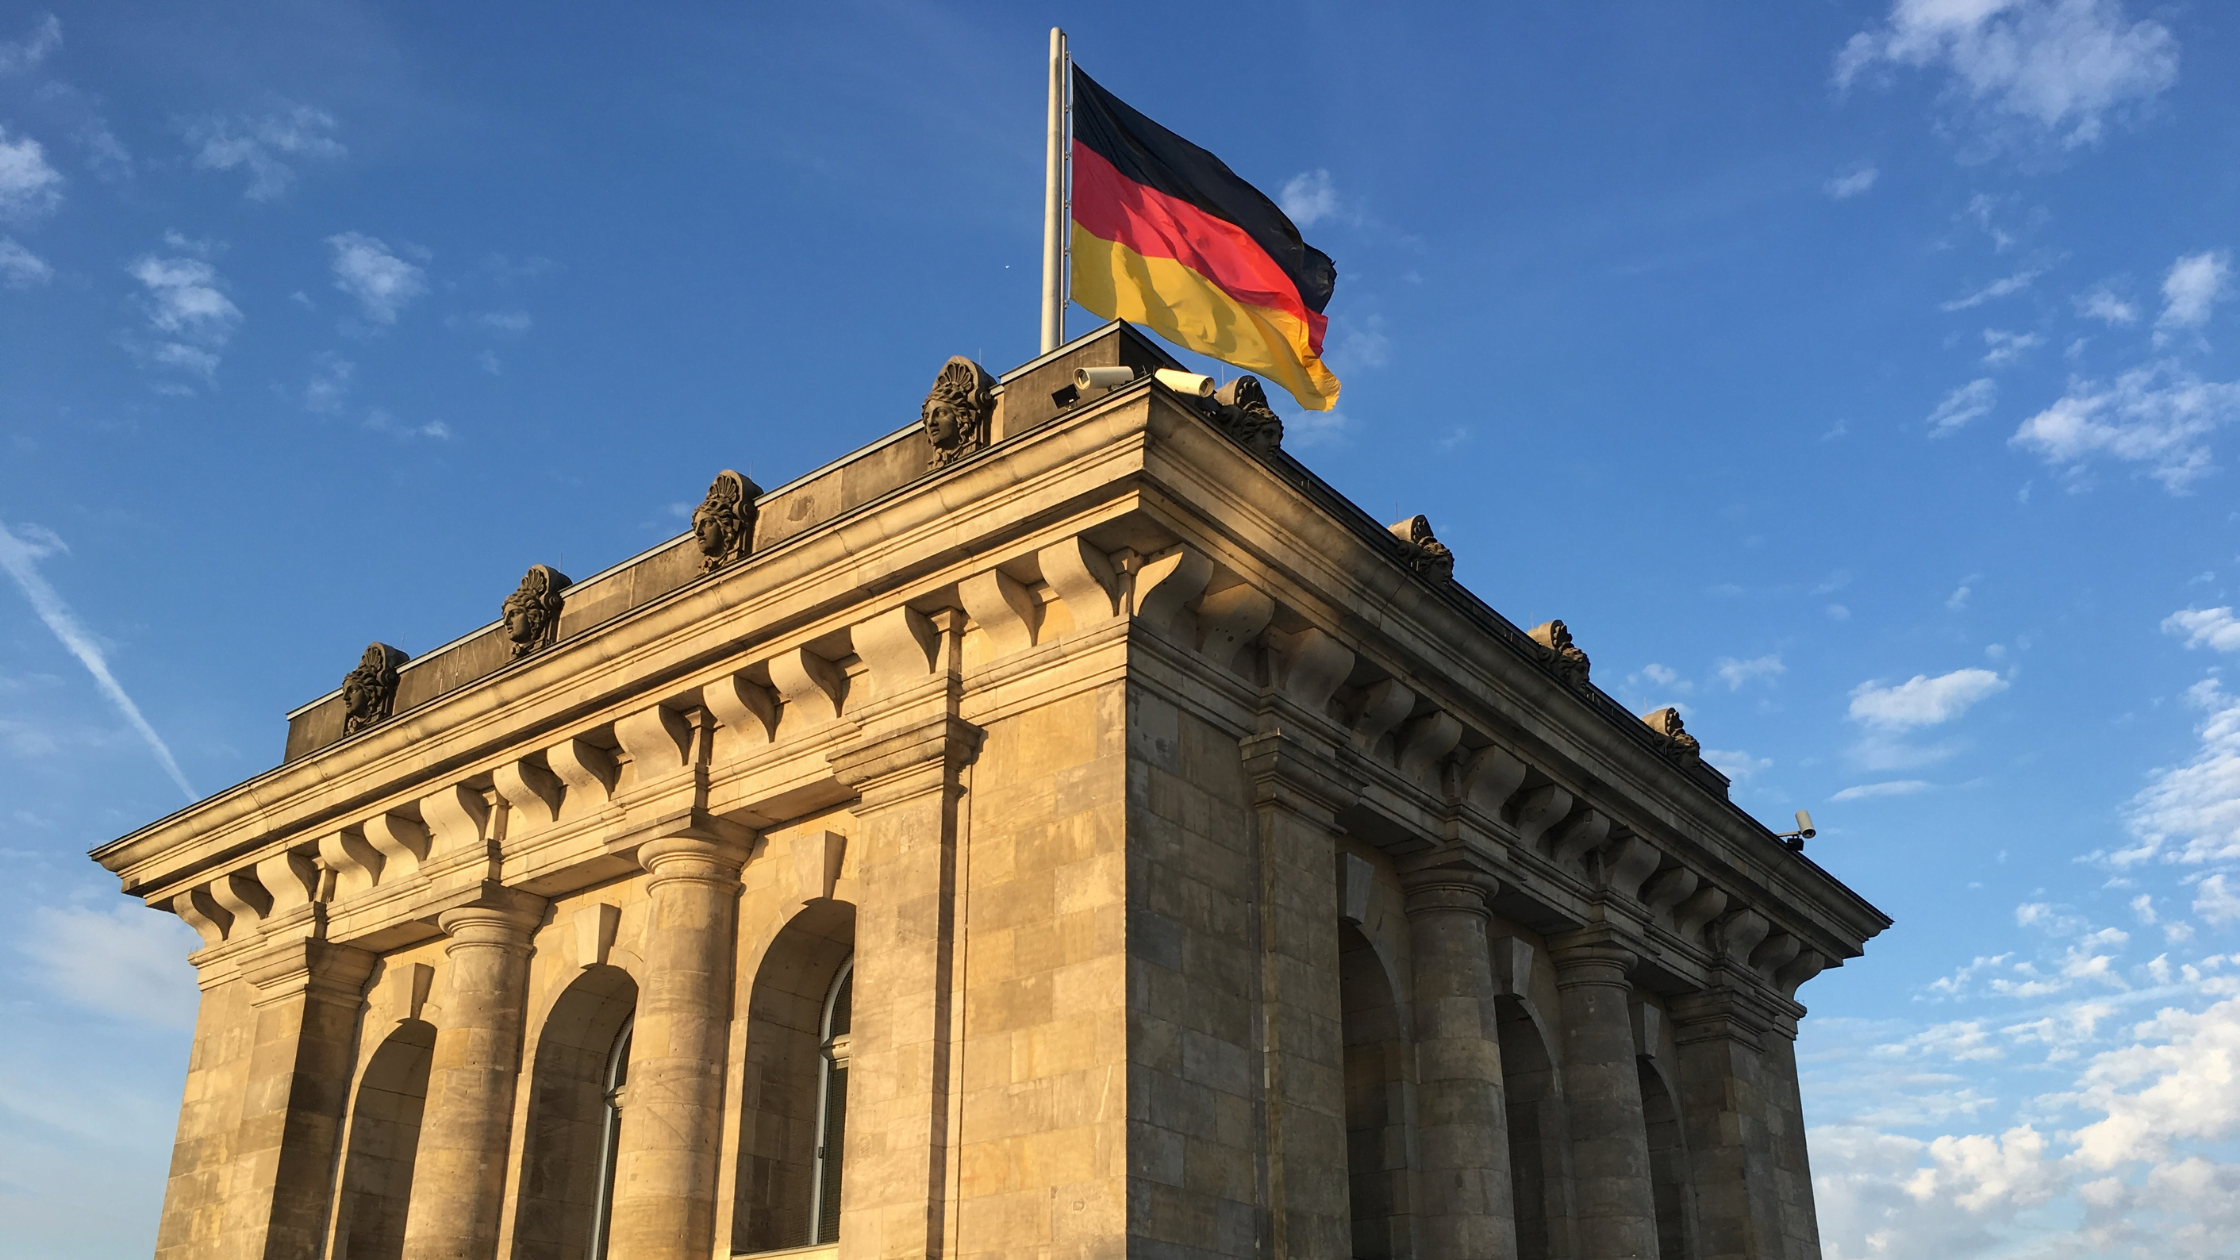 Germany Introduces Digital Process for I.D. Cards, Passports and more